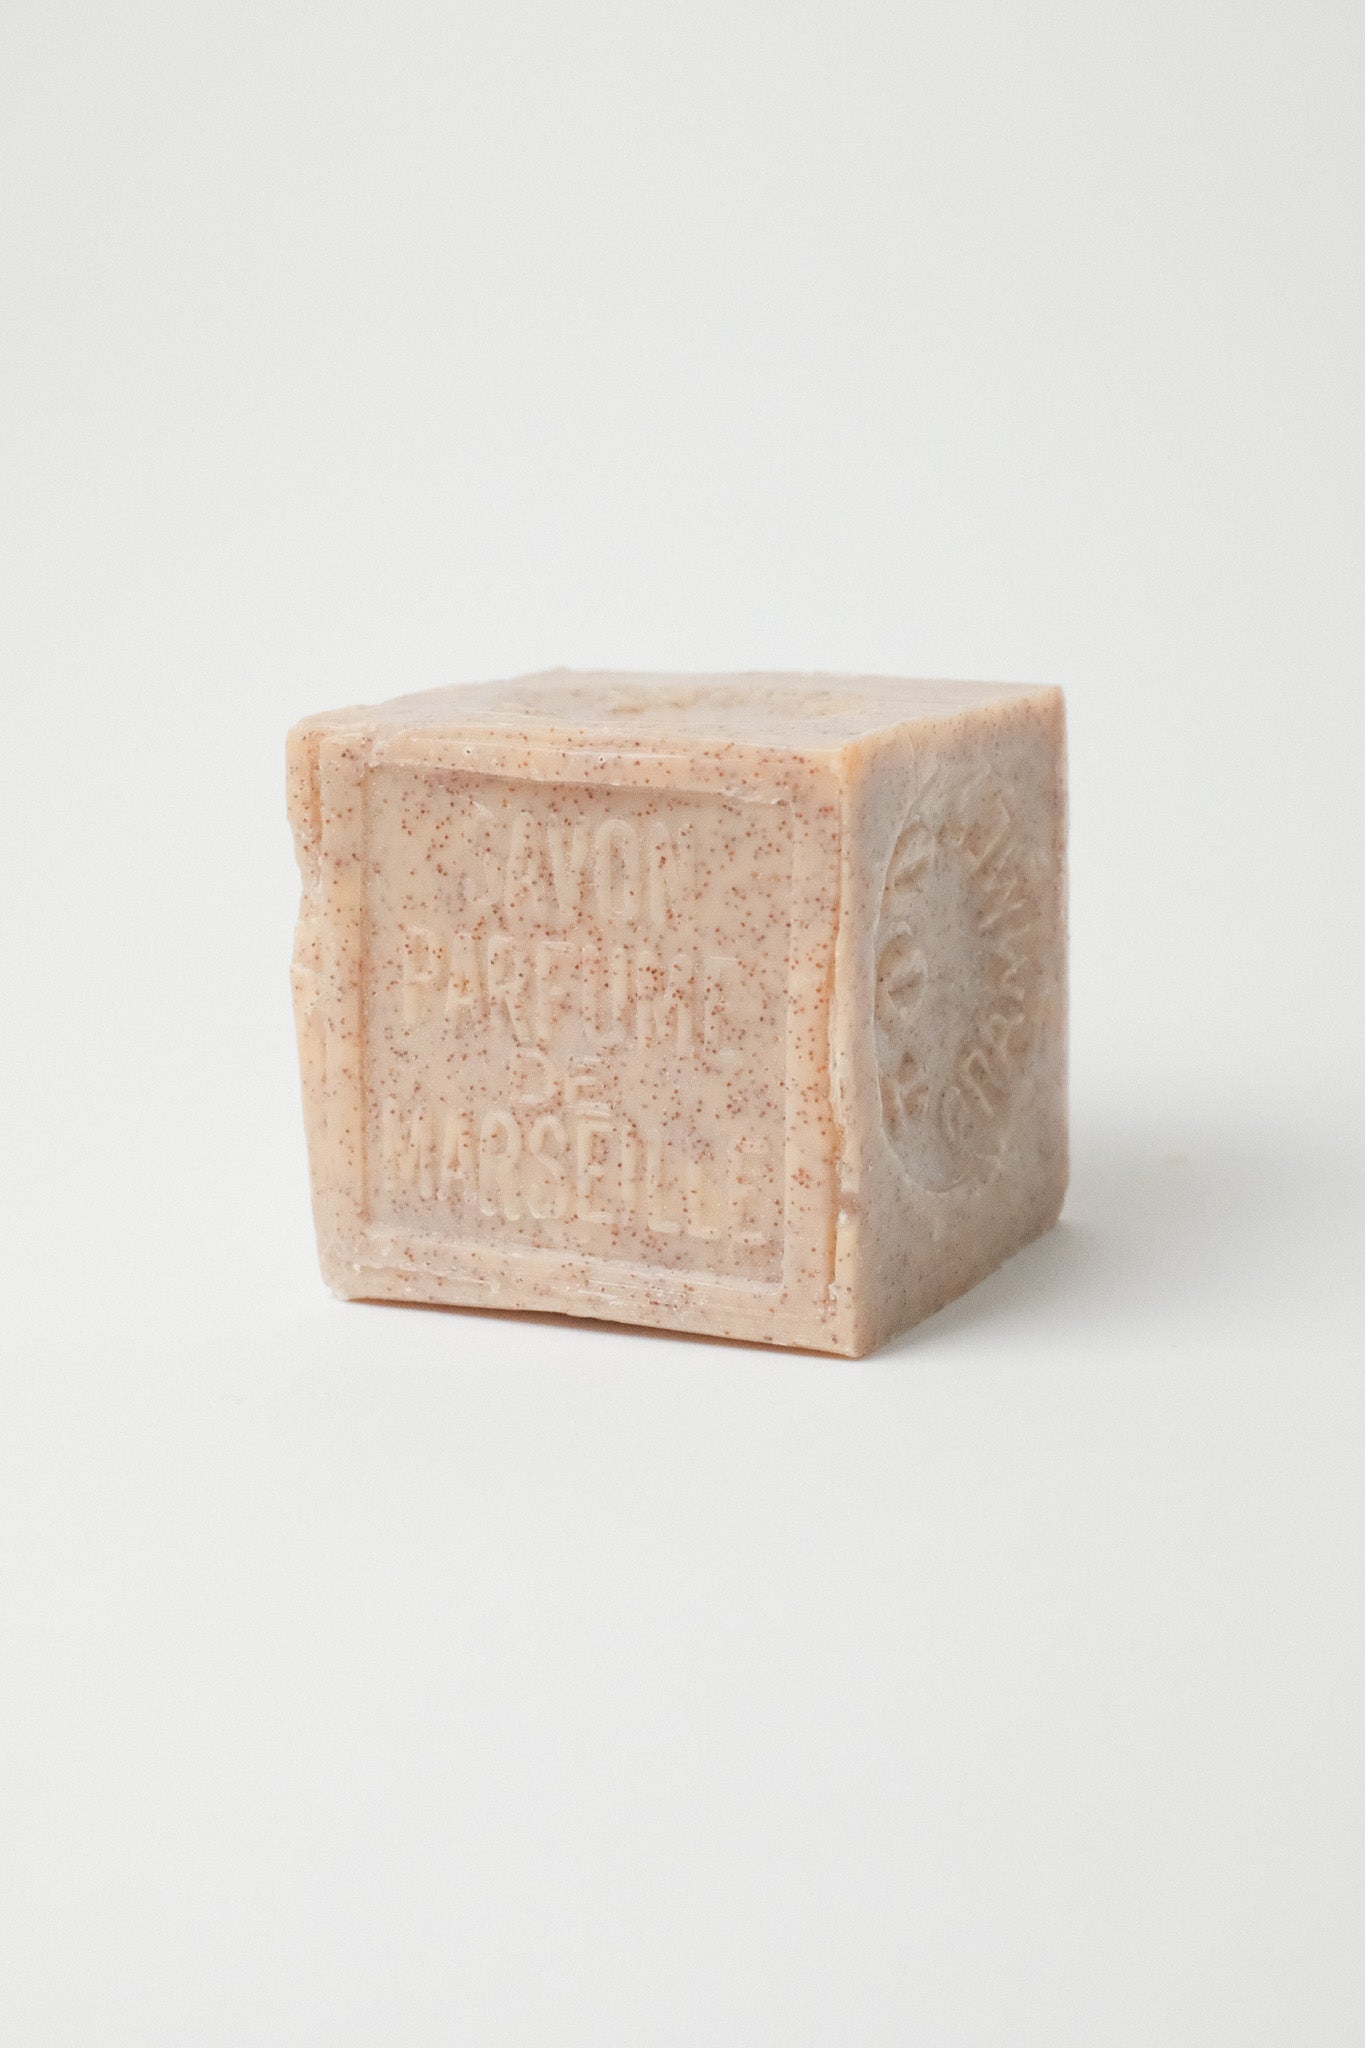 Marseille Soap - Crushed Apricot - 300g